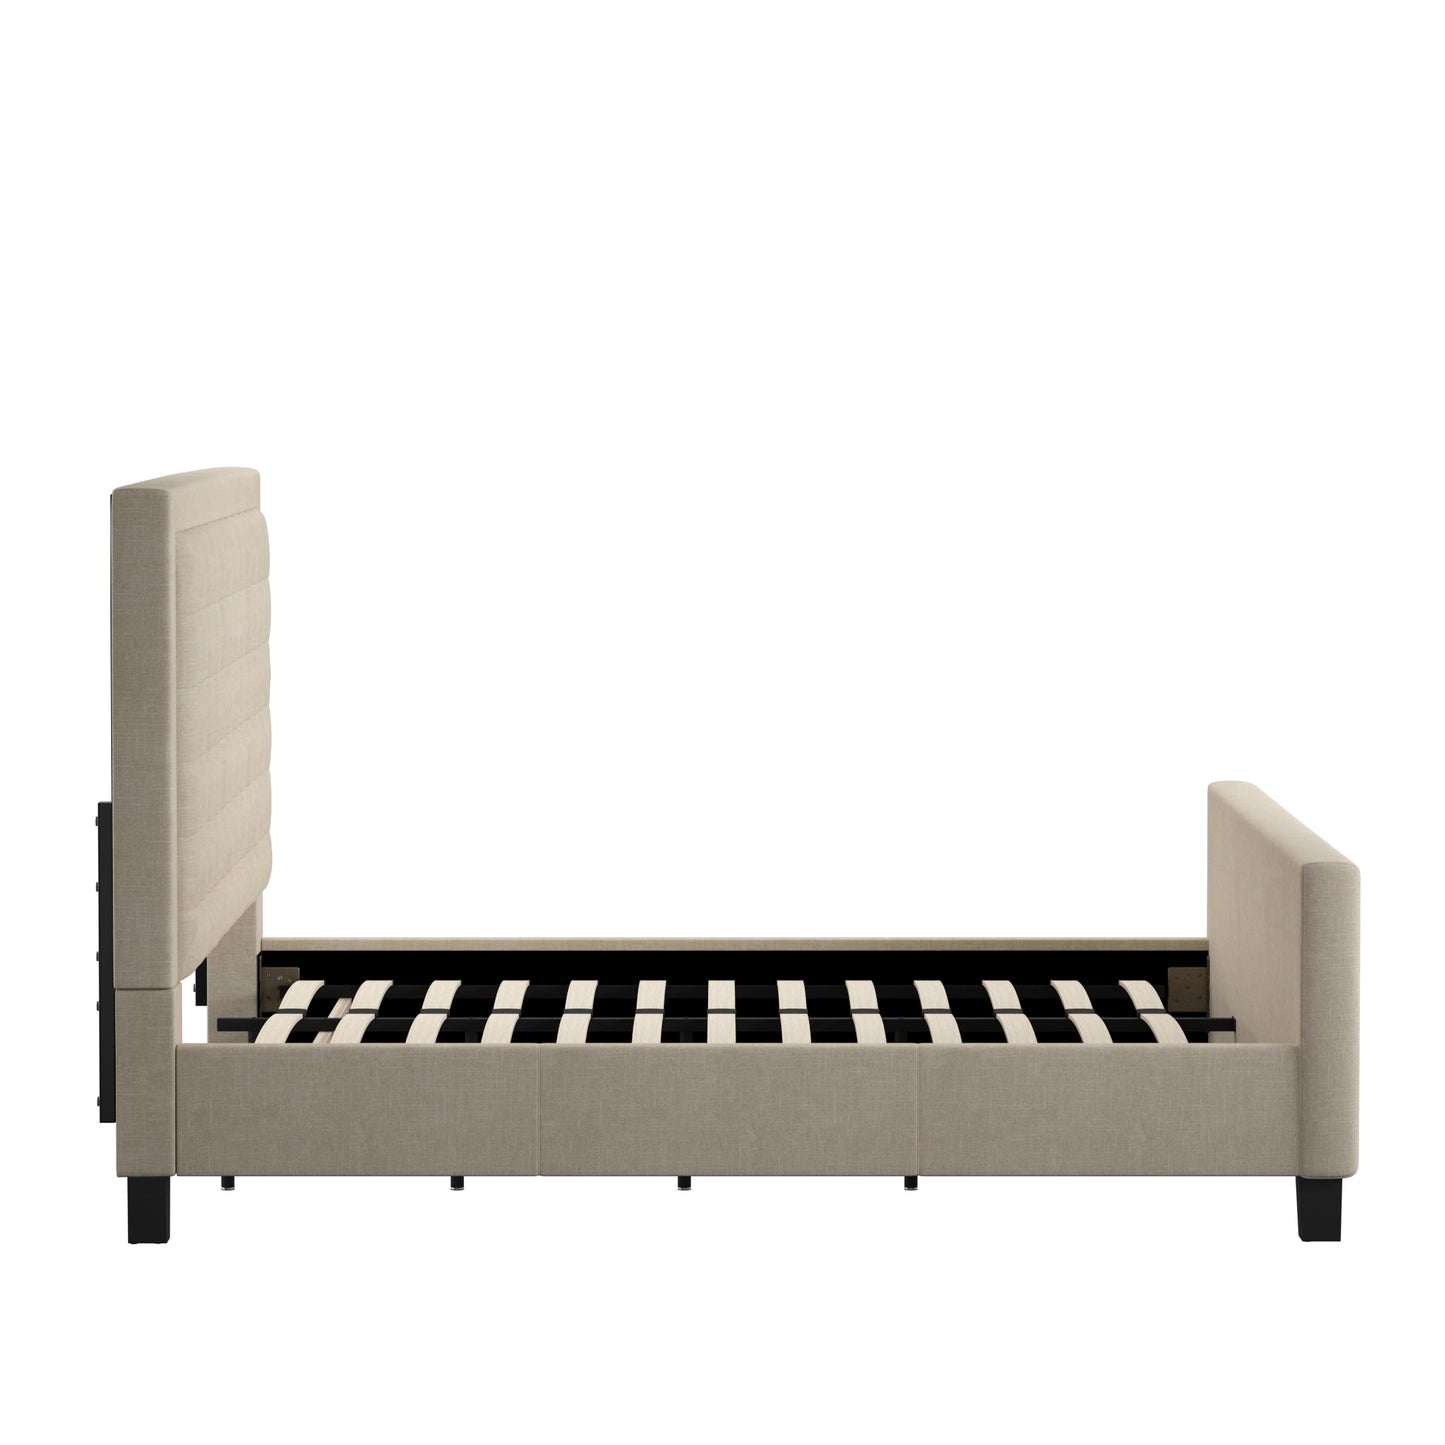 Square Button-Tufted Upholstered Platform Bed with Footboard - Beige, King